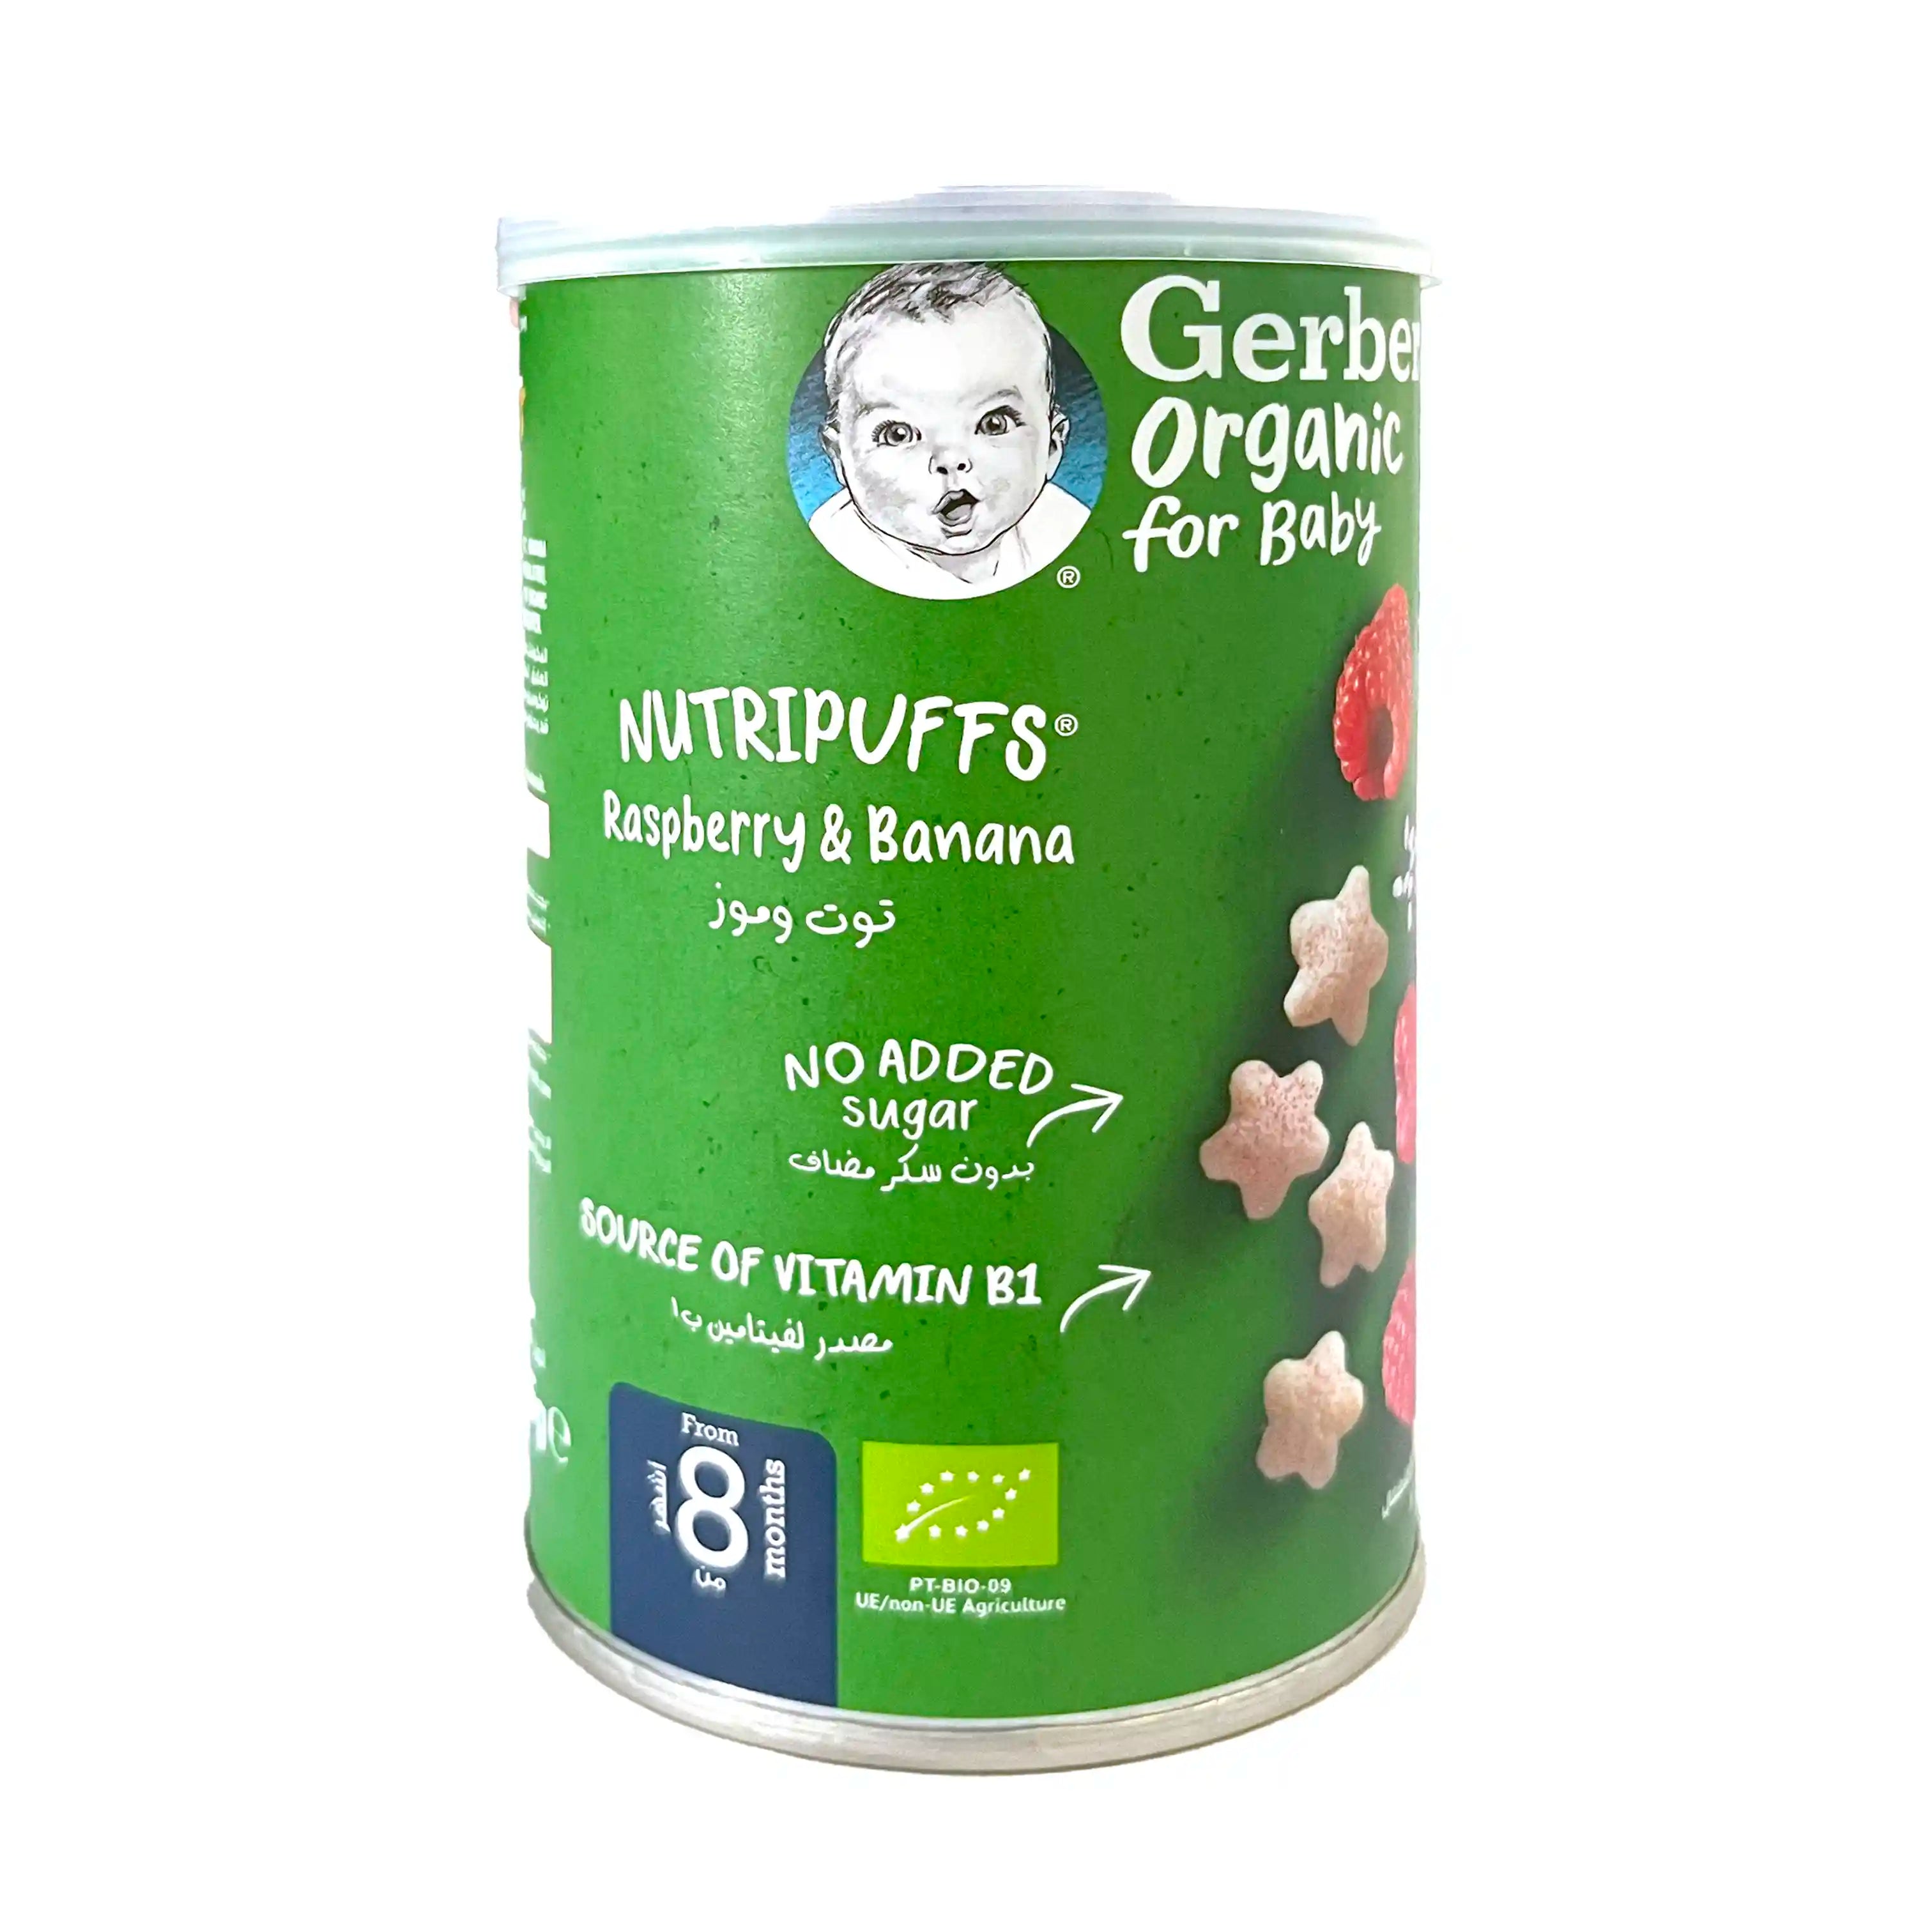 Buy Gerber Organic Nutripuffs with Raspberry & Banana for Small Babies  Online in India at uyyaala.com